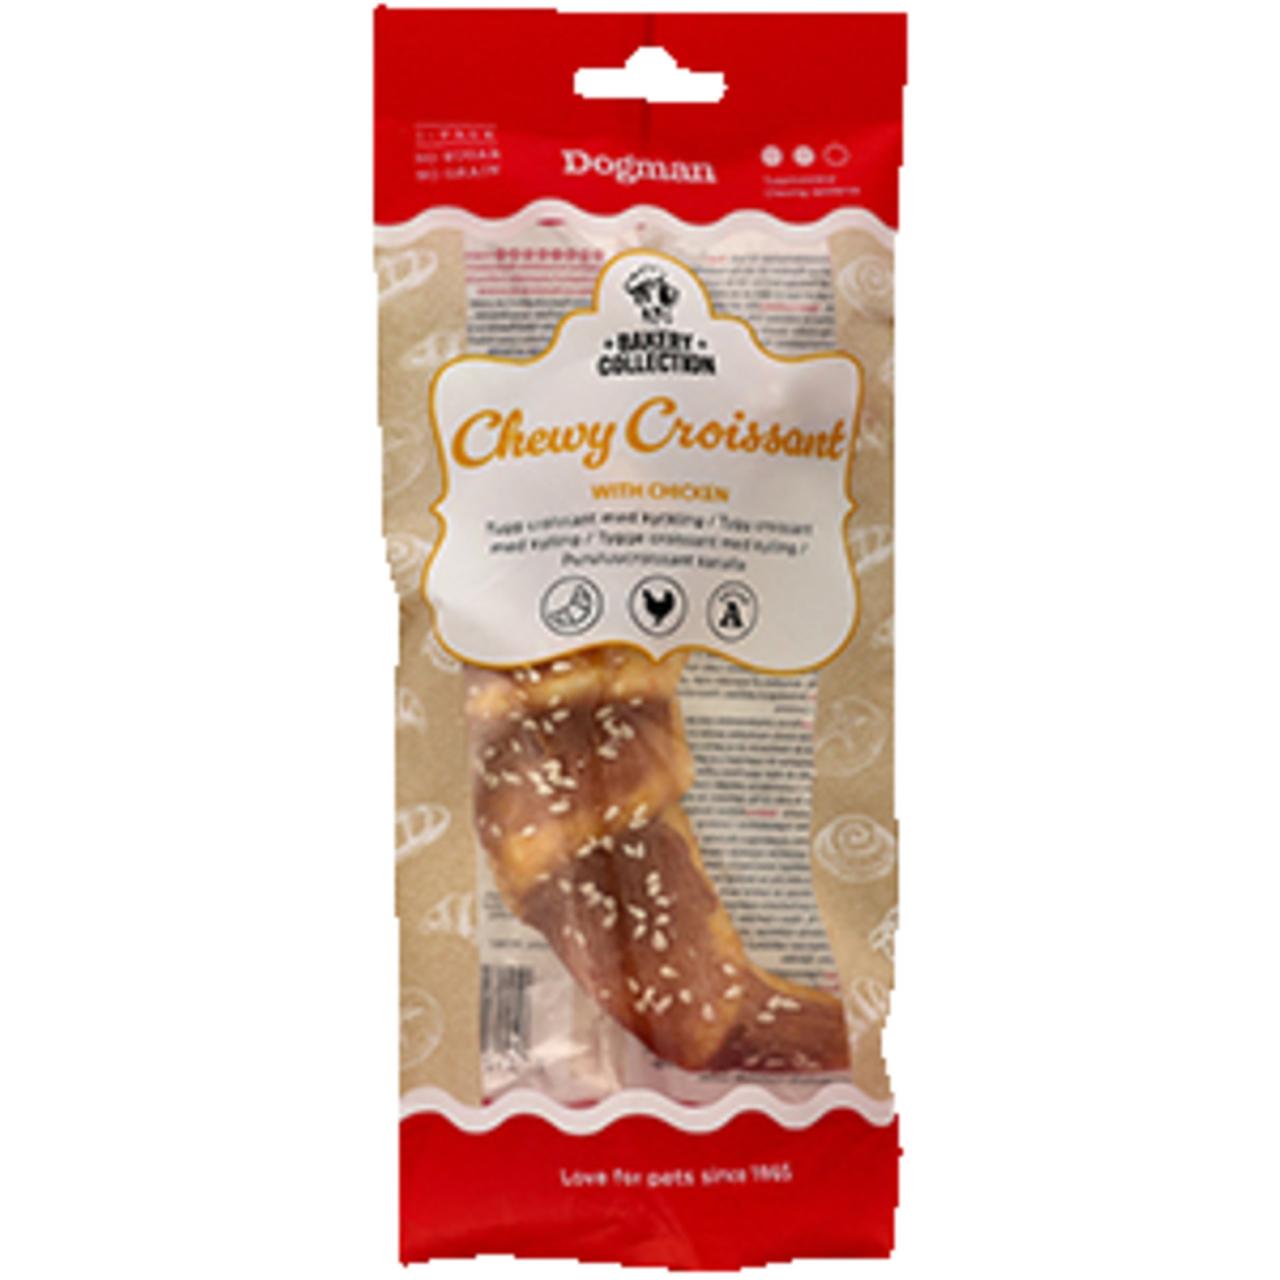 Dogman Bakery Collection Croissant Kylling/Huhn 75g